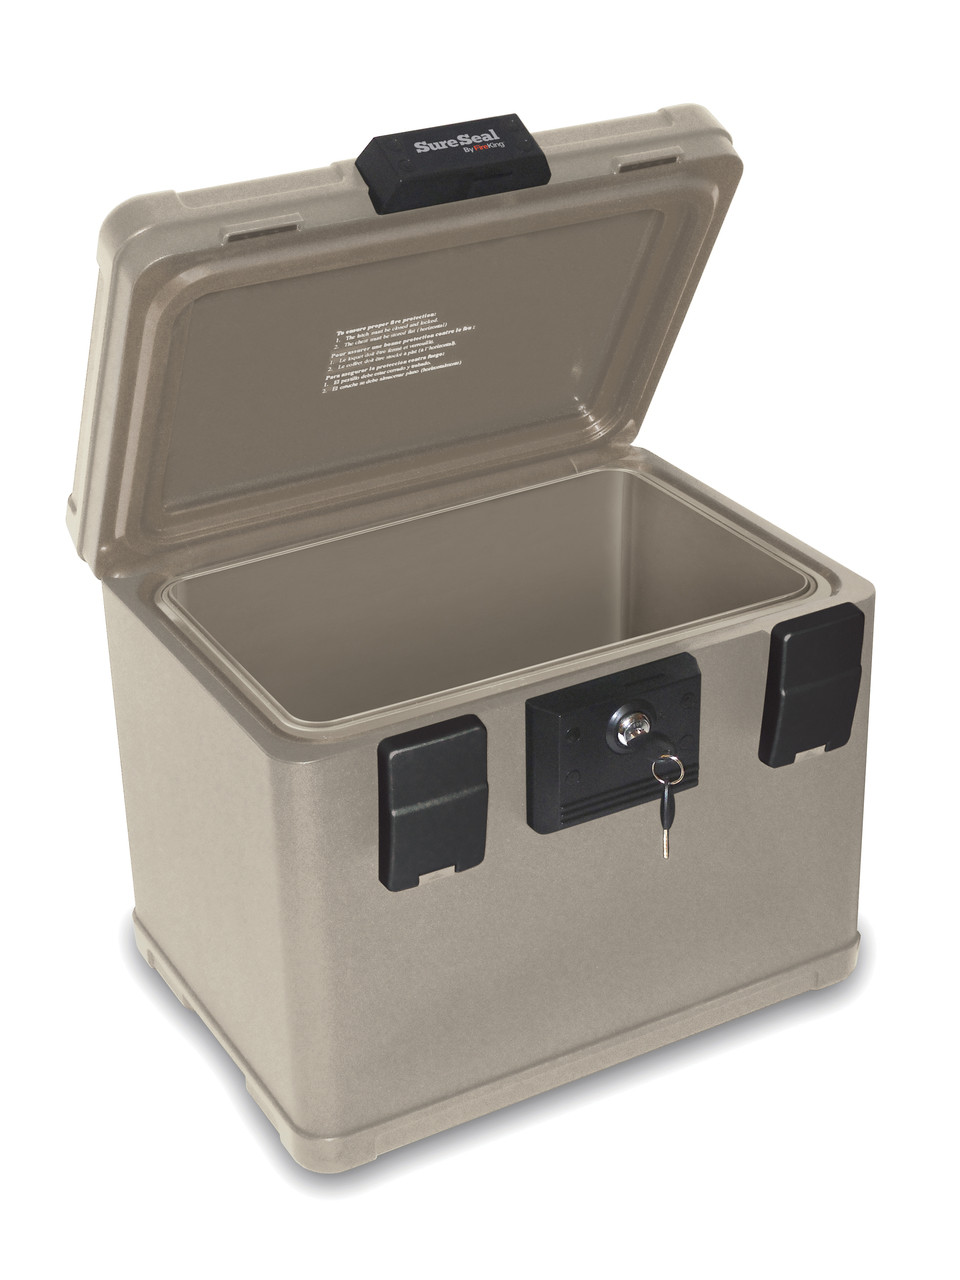 Fireking Fire and Waterproof Chest 0.60 ft3 16w x 12-1/2d x 13h Taupe SS106